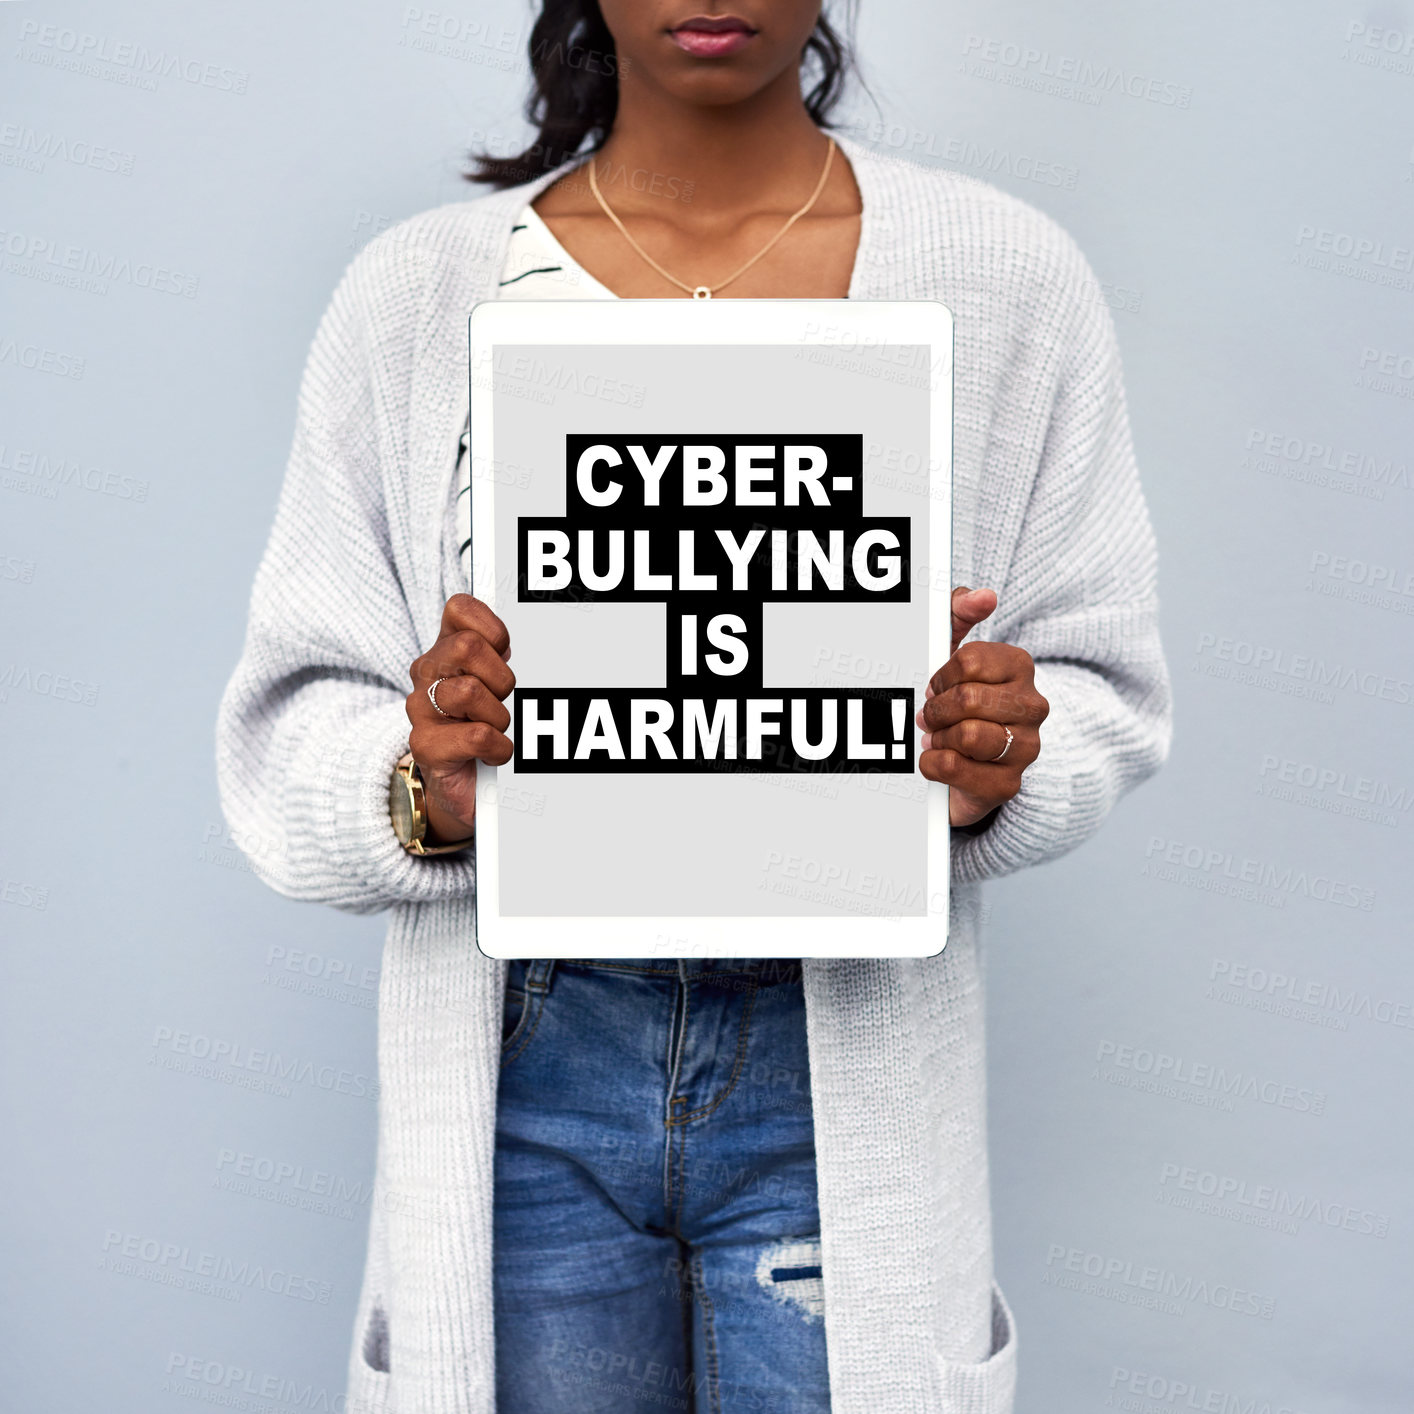 Buy stock photo Studio shot of an unrecognizable young woman holding a tablet with the message 